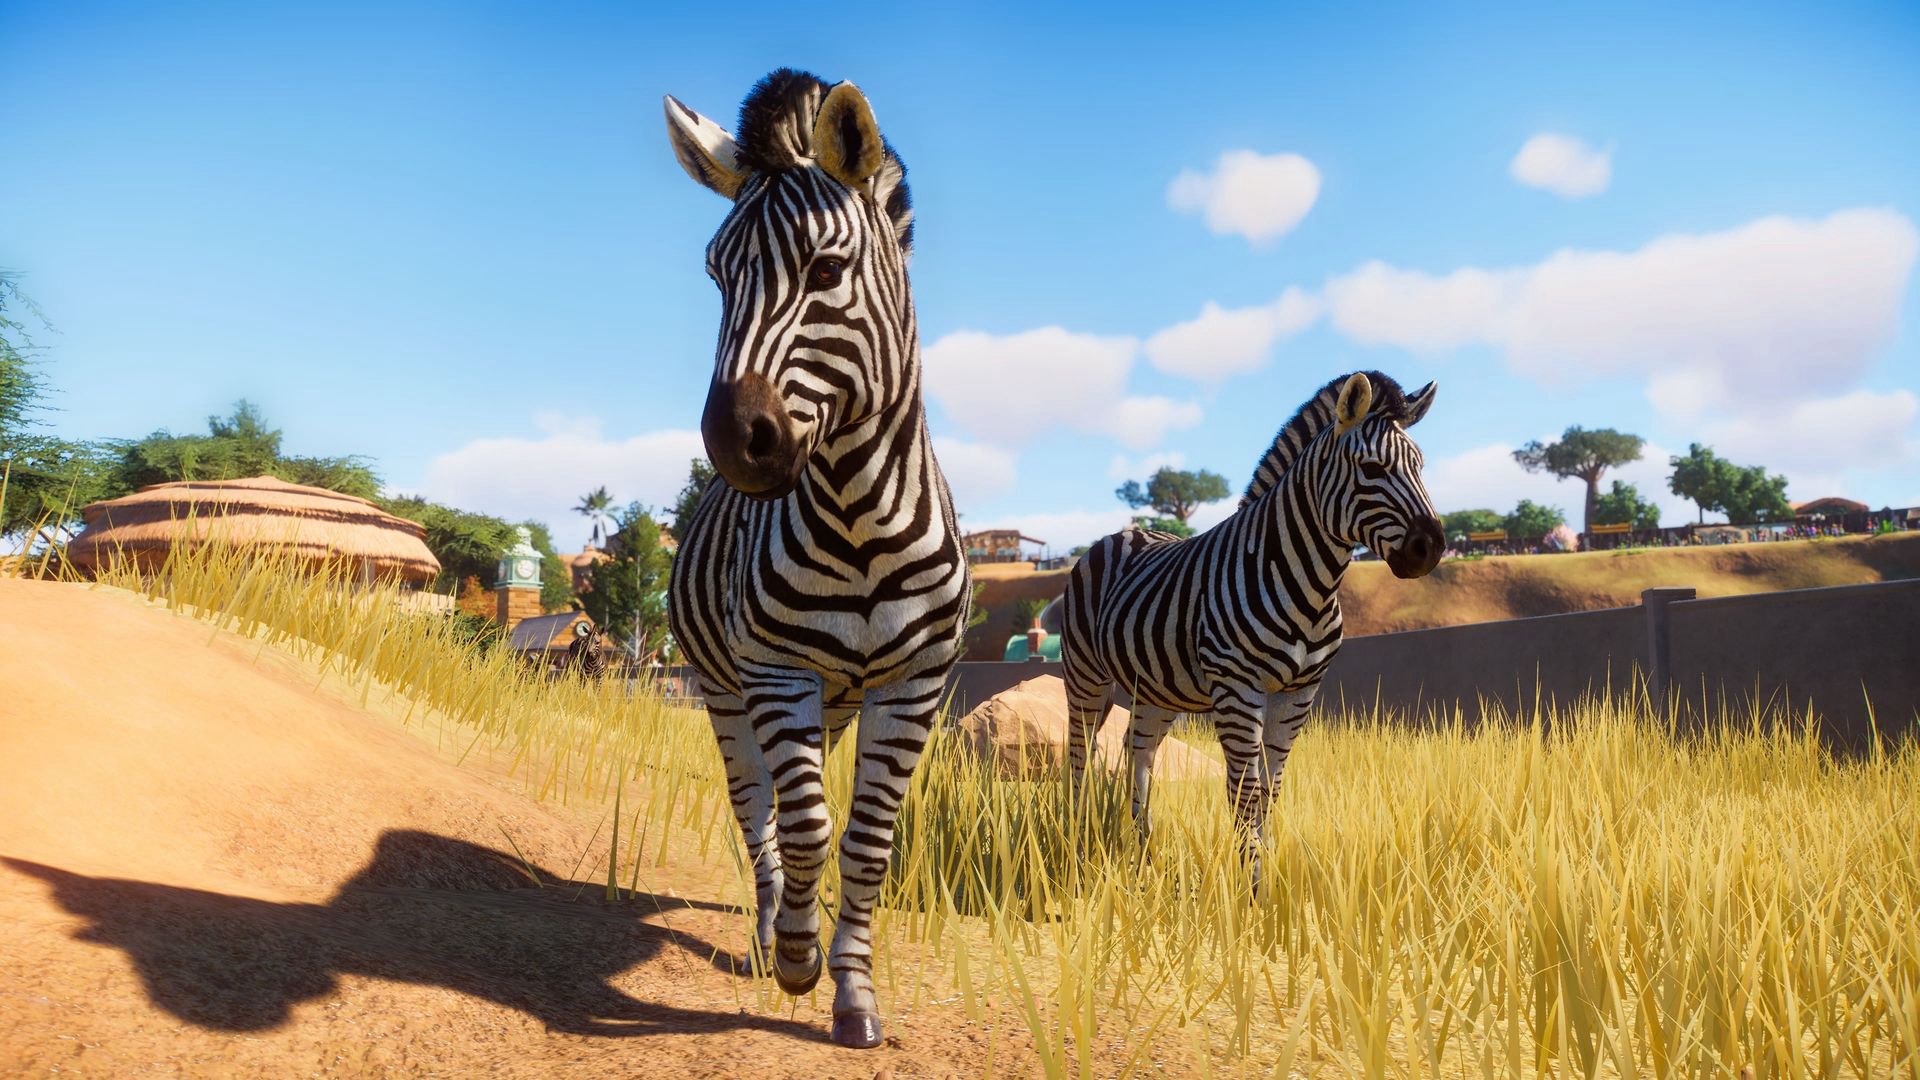 Planet Zoo: Ultimate Edition 2021 Steam CD Key